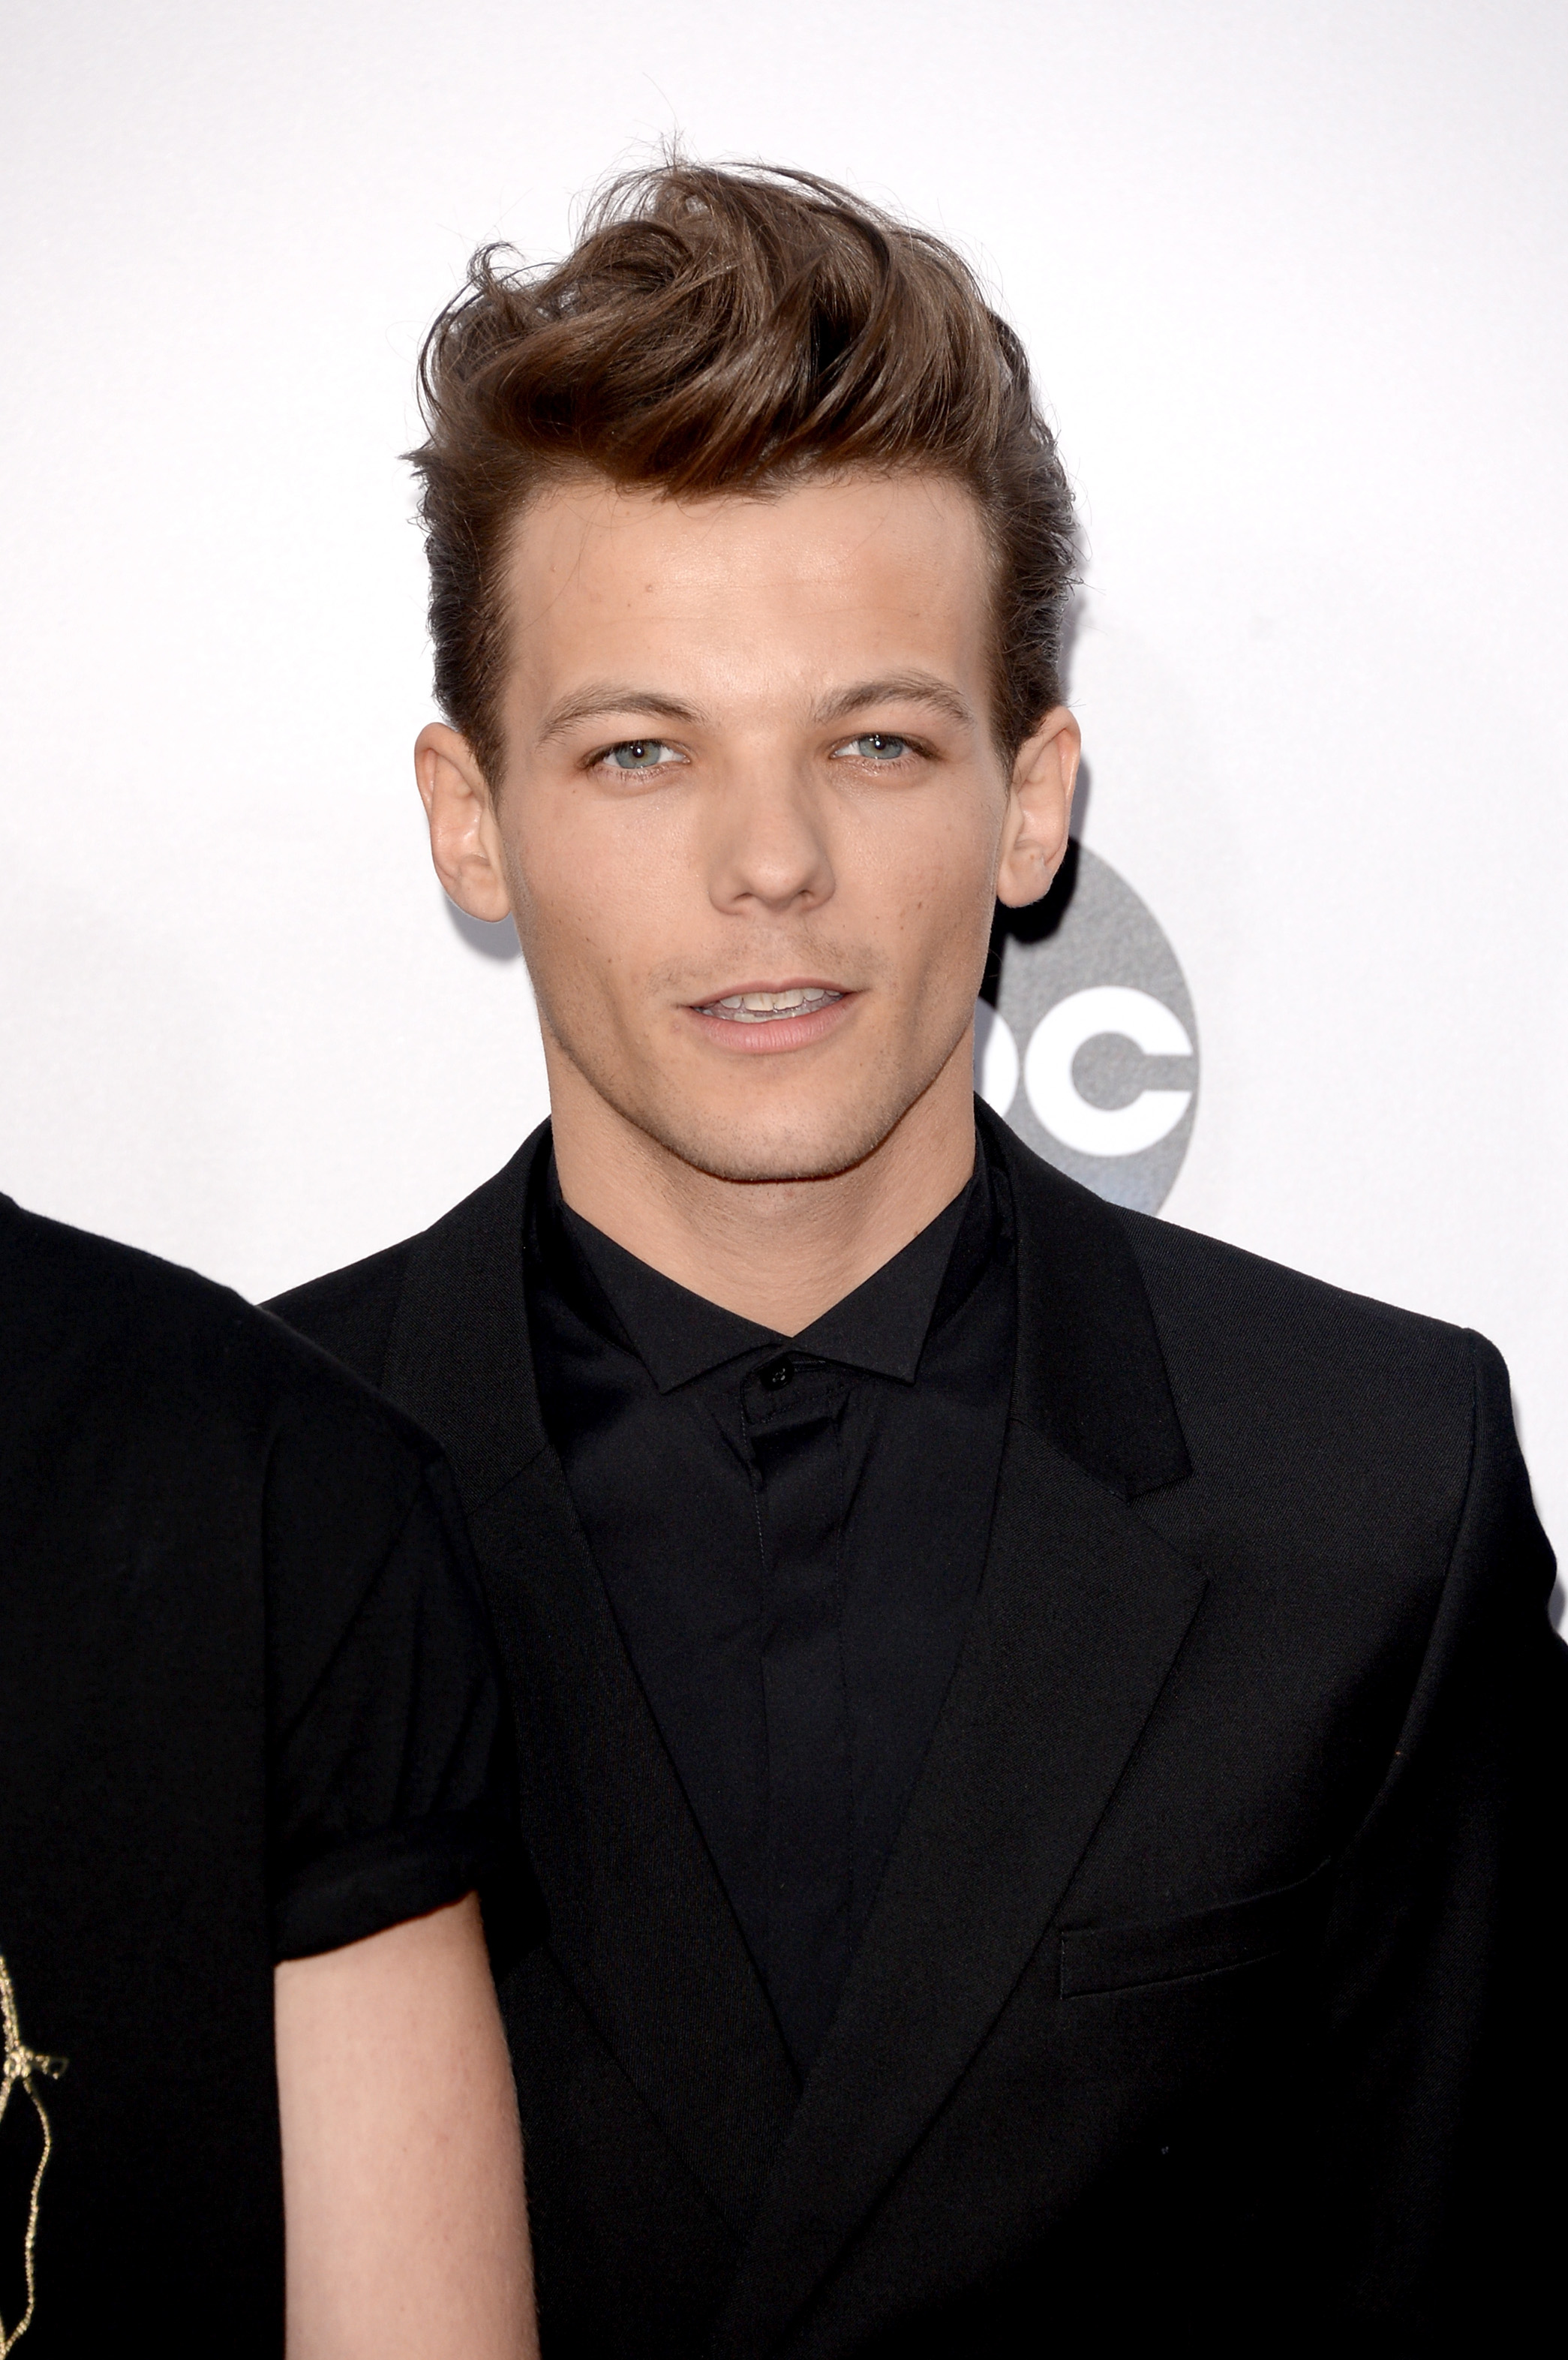 Louis Tomlinson To Focus On Record Label | Music News - CONVERSATIONS ABOUT  HER